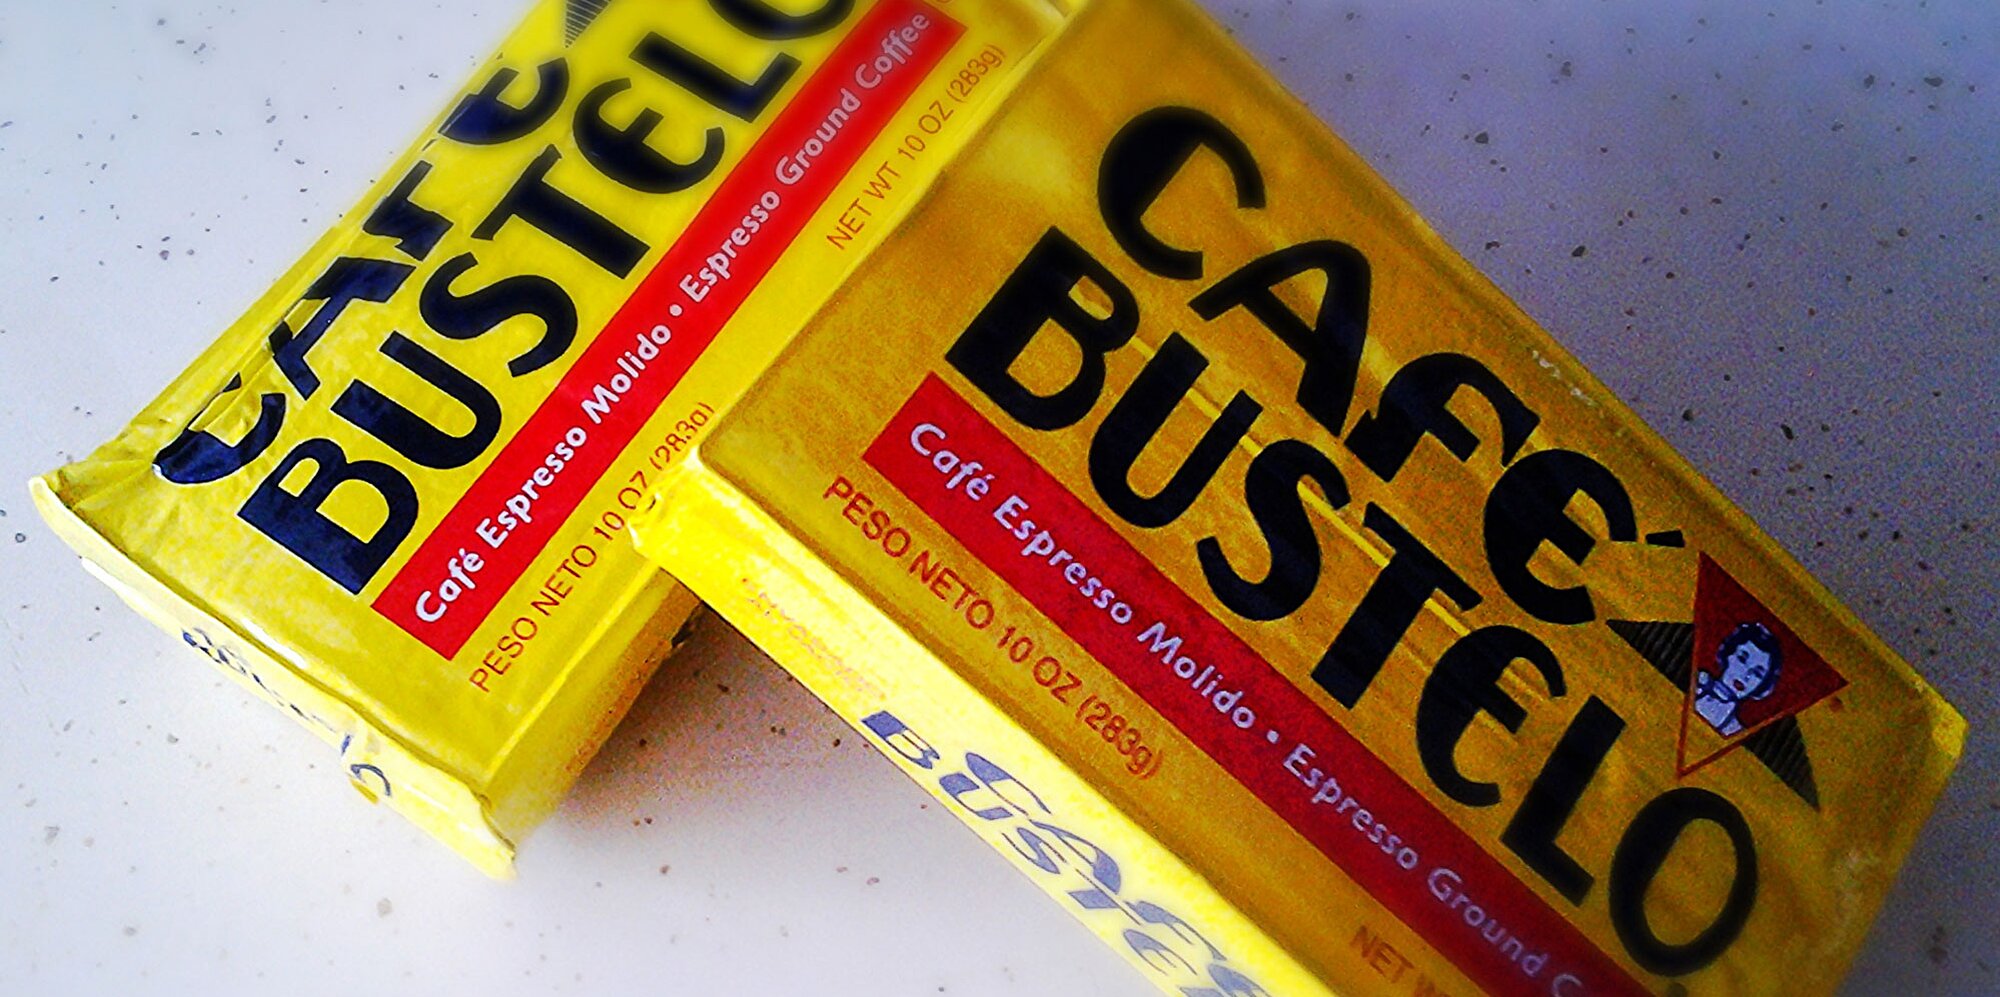 Some of the best ways to use cafe bustelo grounds